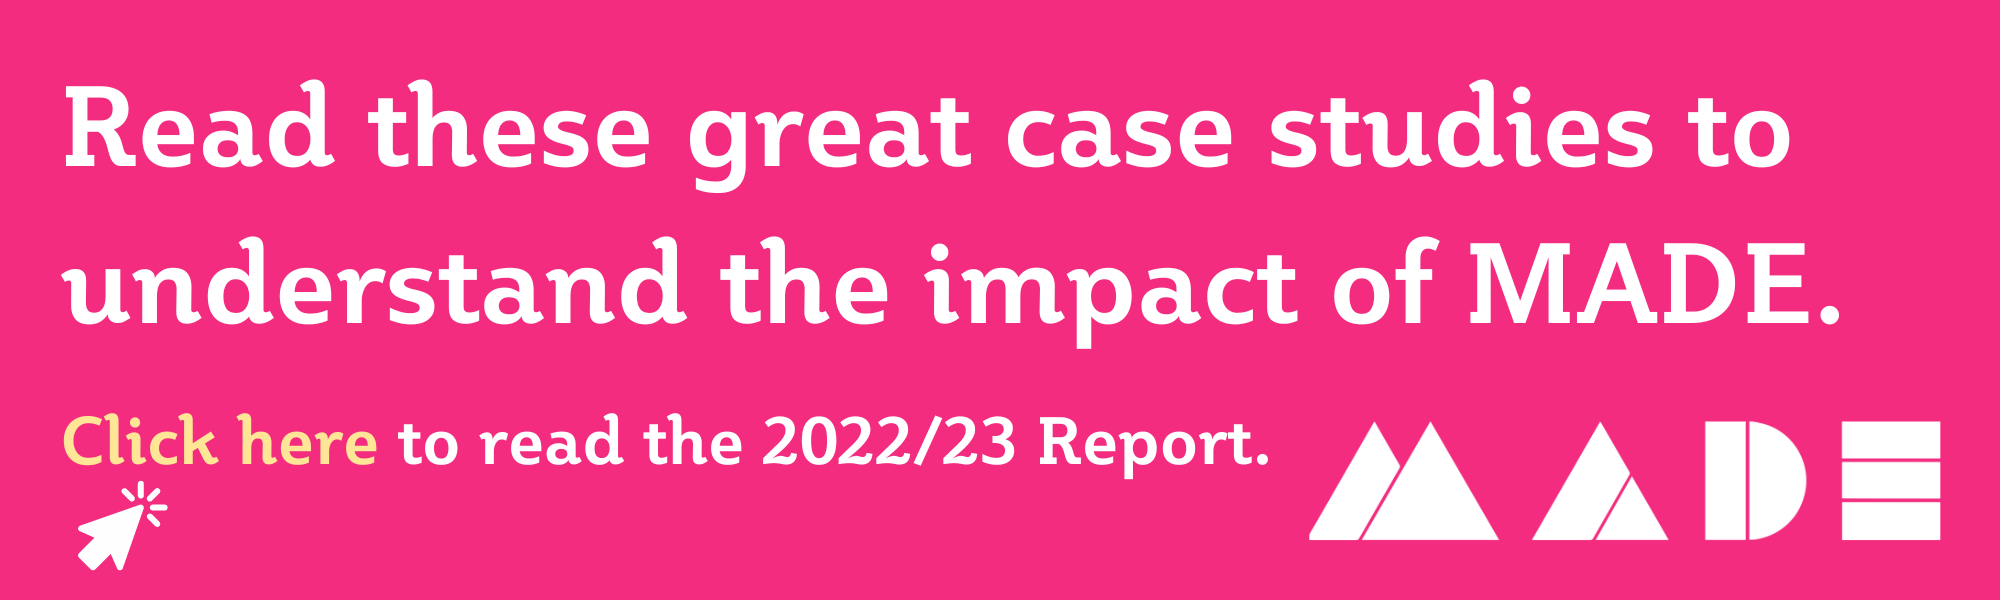 A pink graphic with the MADE logo. A click through to read case studies from MADE's 2022/23 Annual Report. 